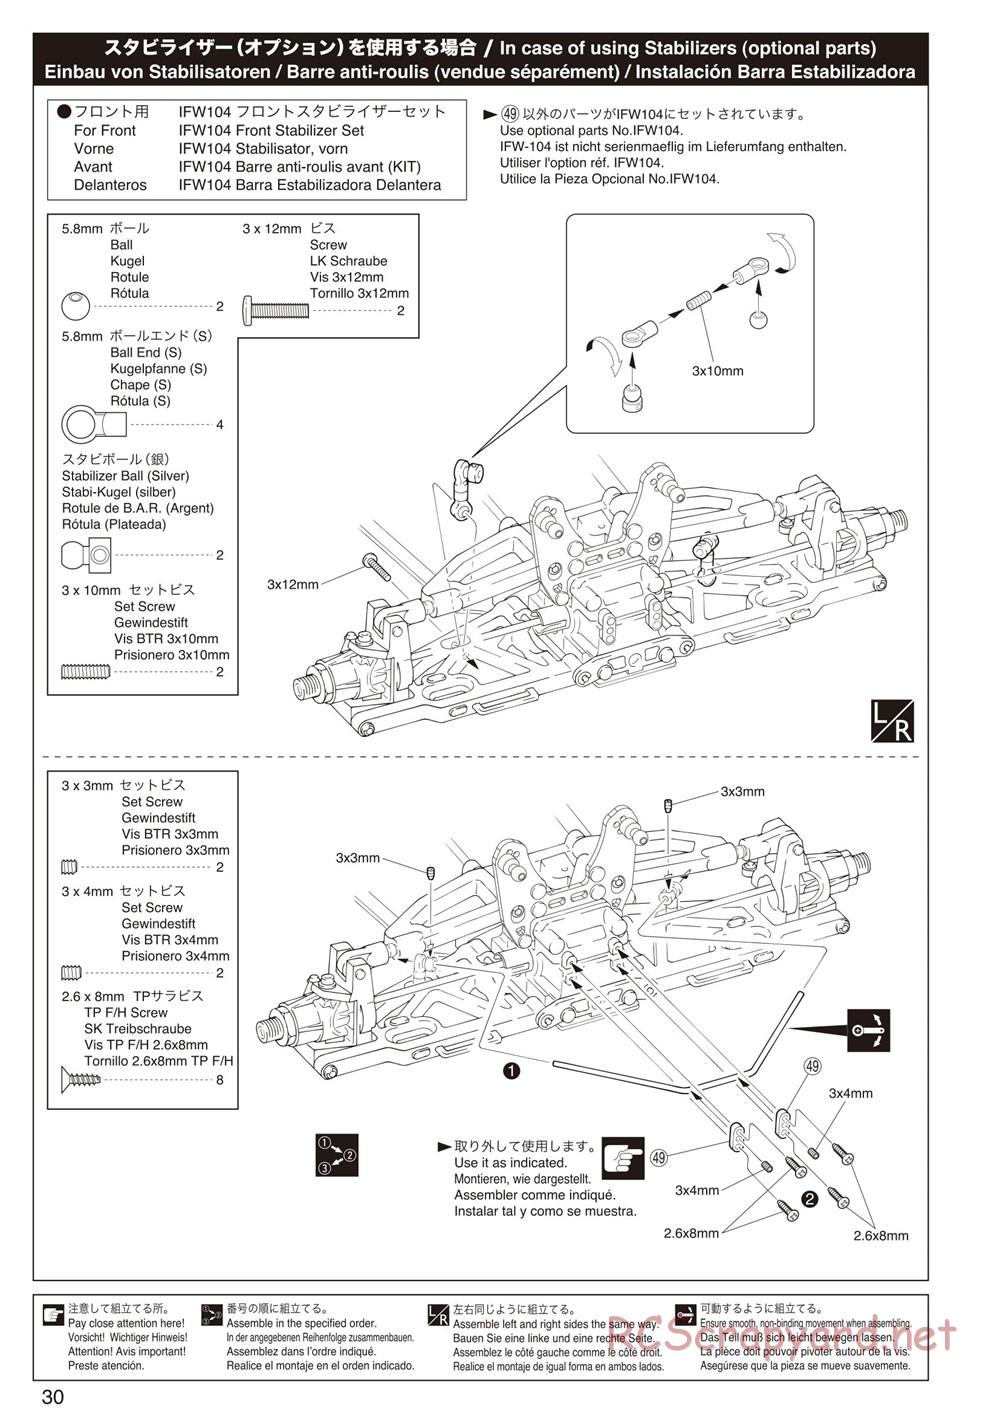 Kyosho - Inferno Neo 2.0 - Manual - Page 30